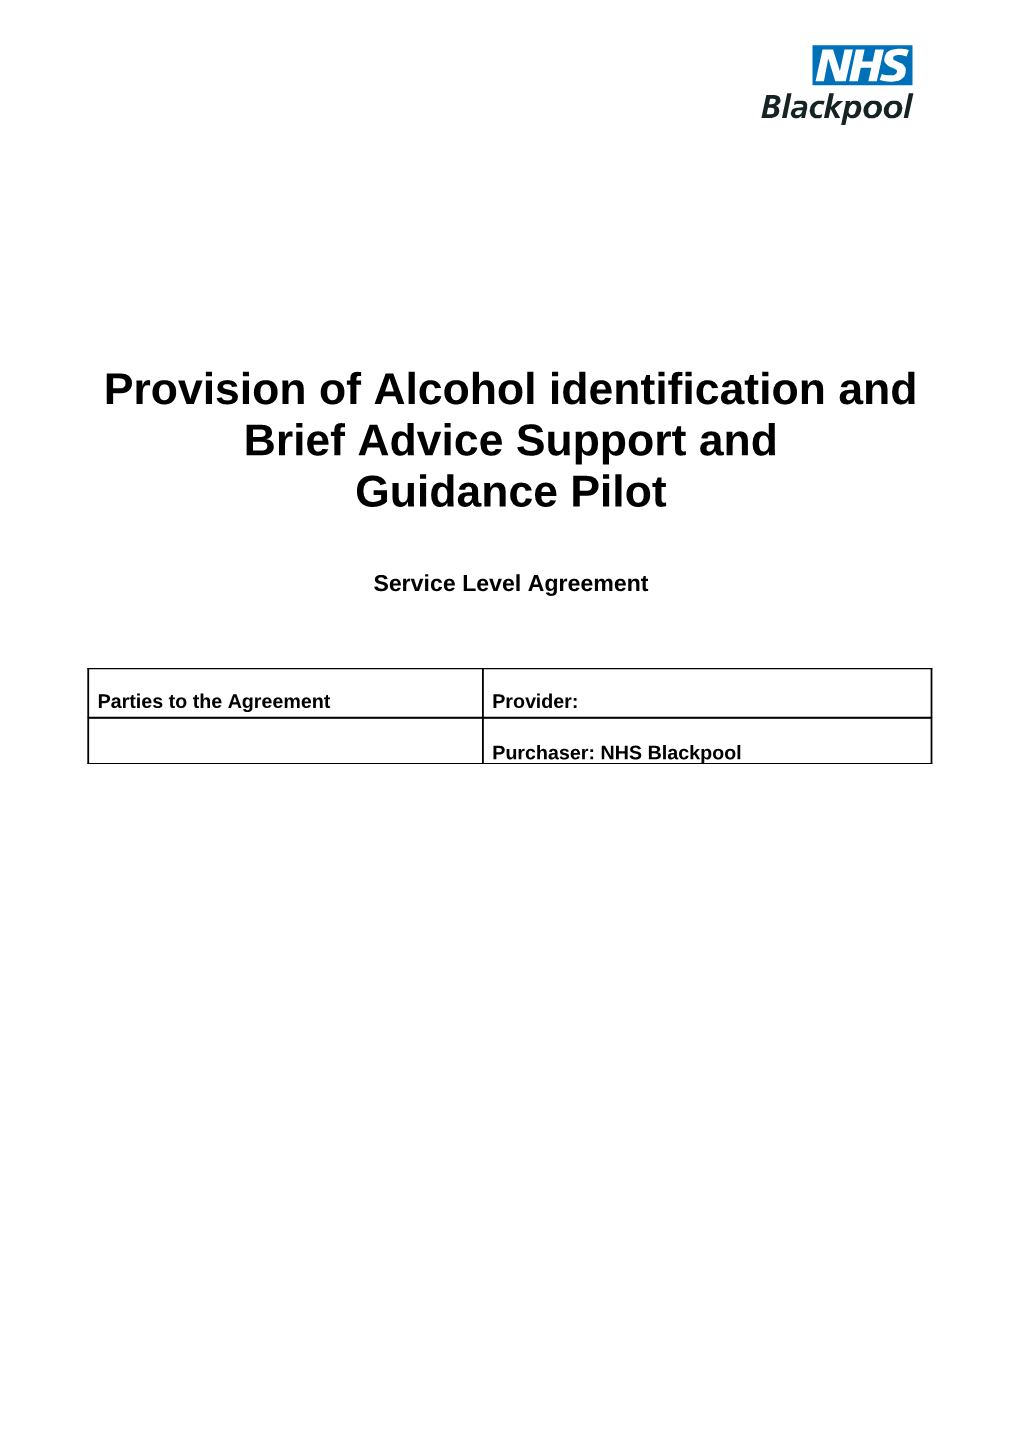 Provision of Alcohol Identification and Brief Advice Support And